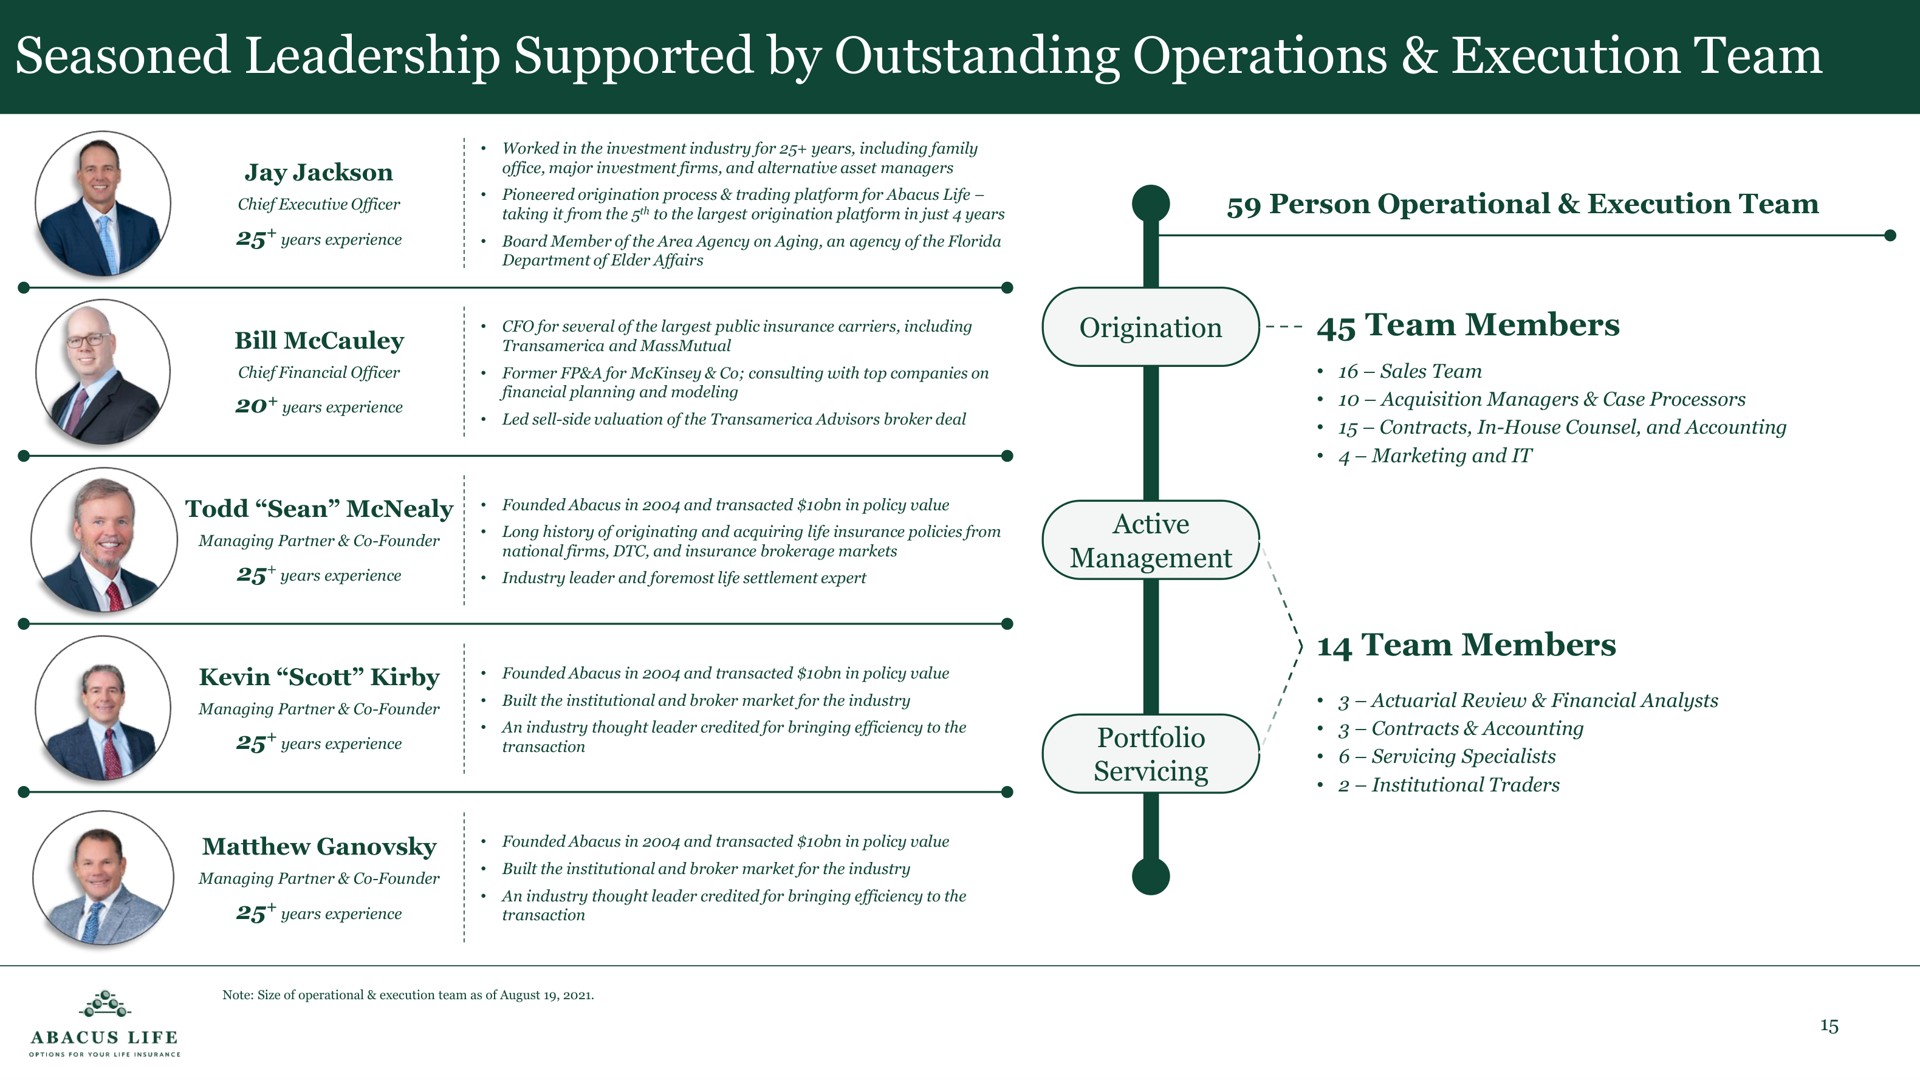 seasoned leadership supported by outstanding operations execution team team members team members | Abacus Life